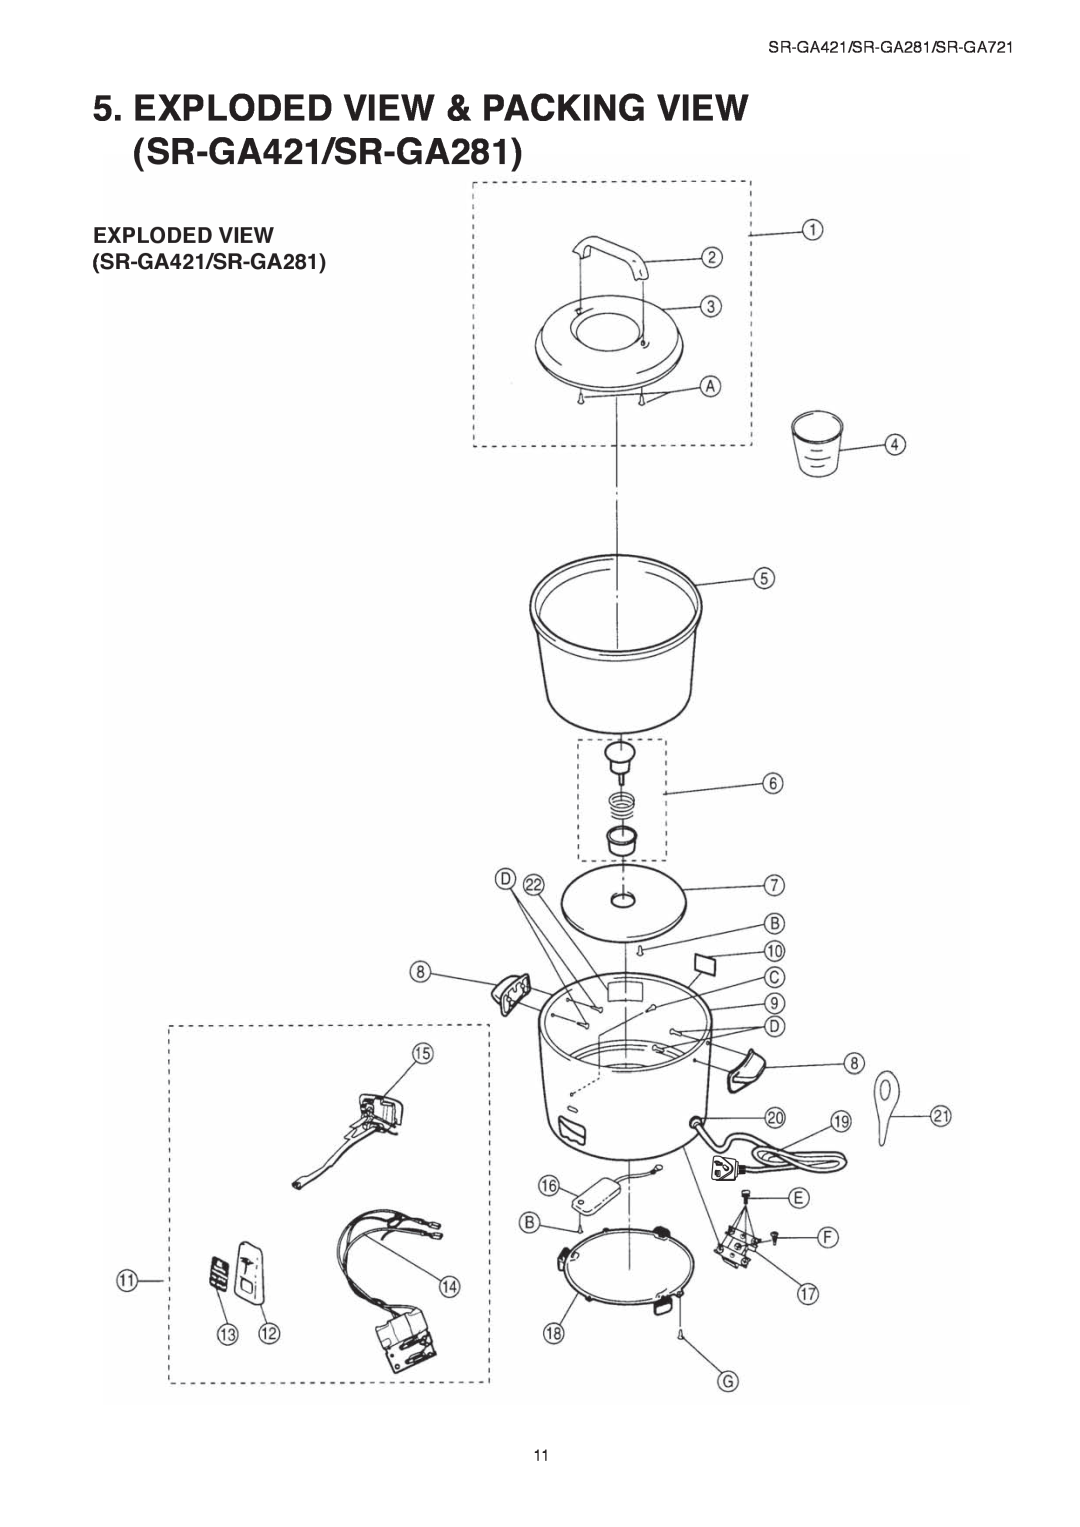 Panasonic service manual EXPLODED VIEW & PACKING VIEW SR-GA421/SR-GA281, EXPLODED VIEW SR-GA421/SR-GA281 